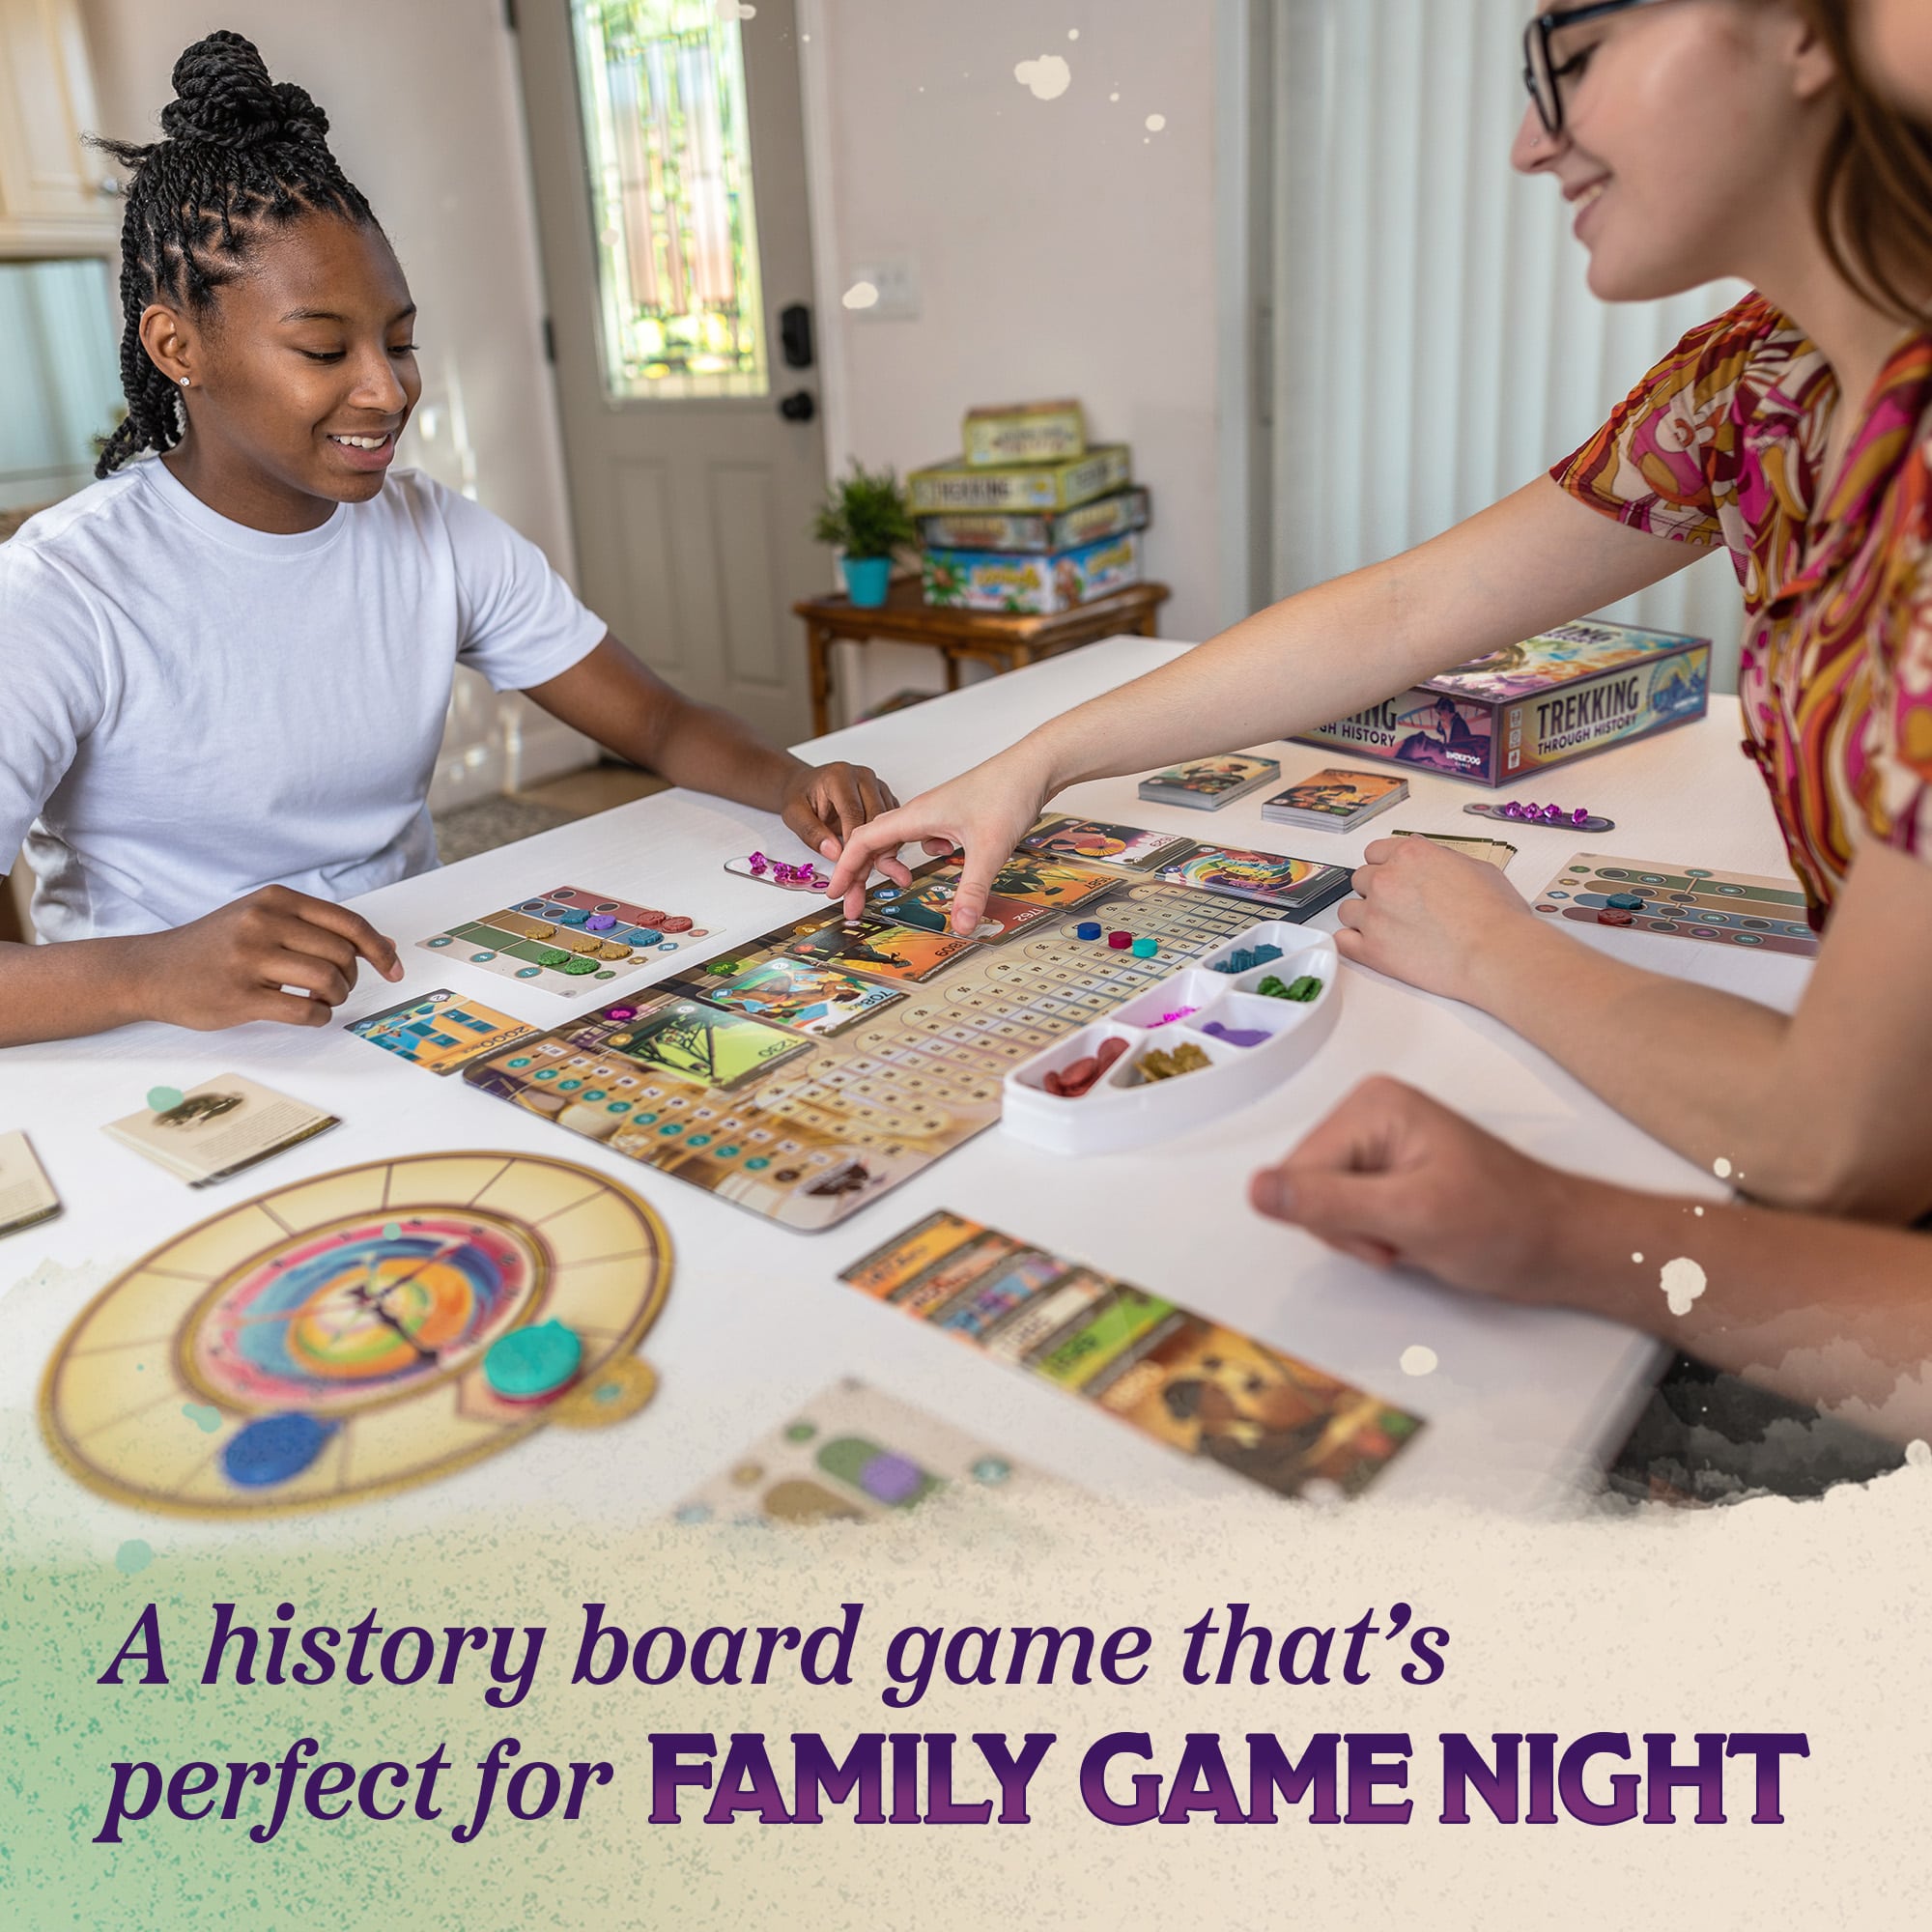 Trekking Through History: The Family Board Game with an Adventure Through Time